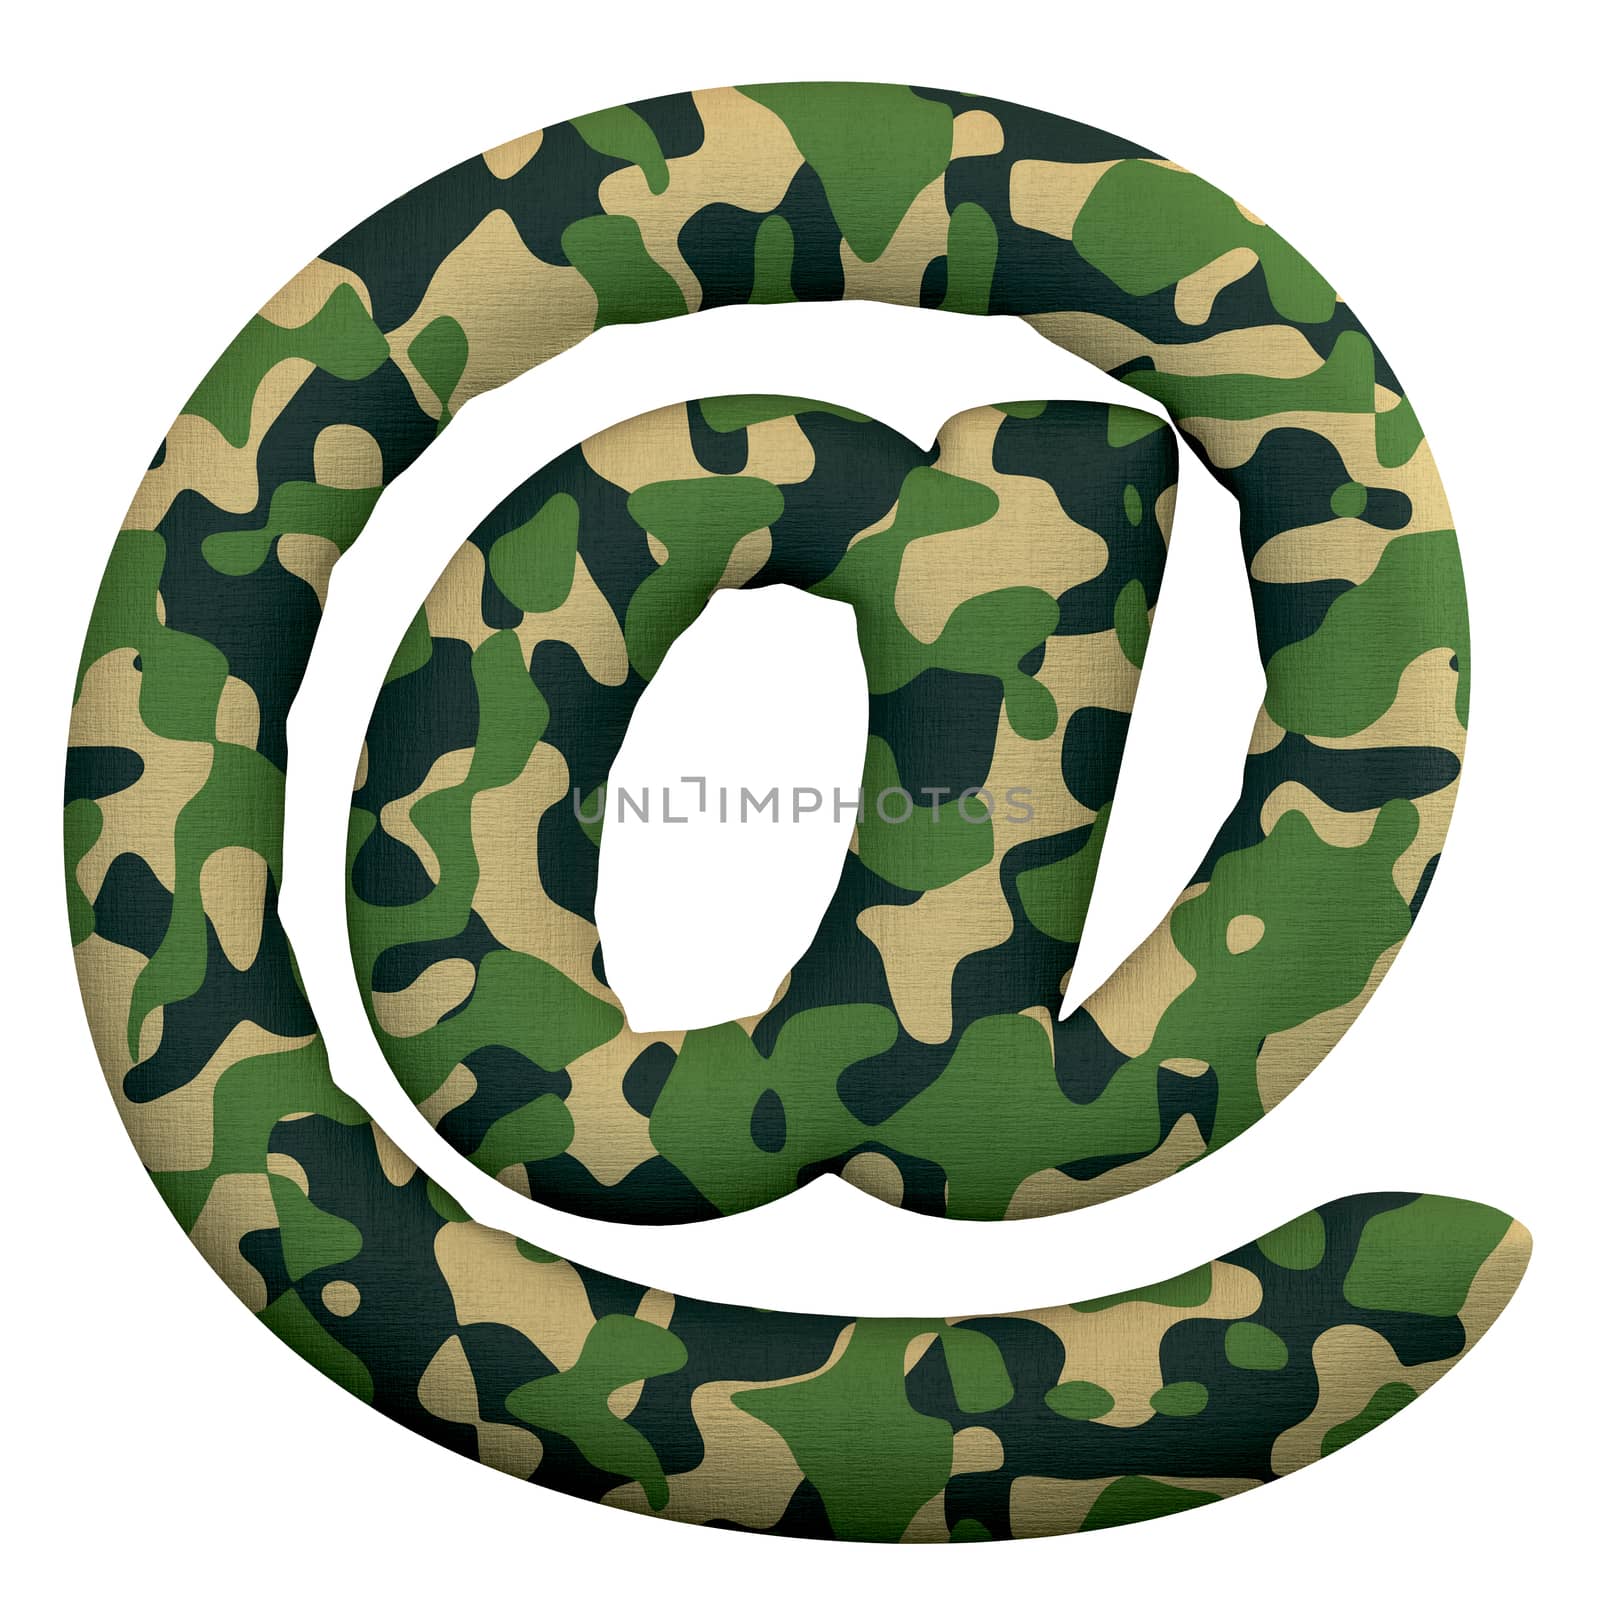 Army email sign - at sign3d Camo symbol - Army, war or survivalism concept by chrisroll